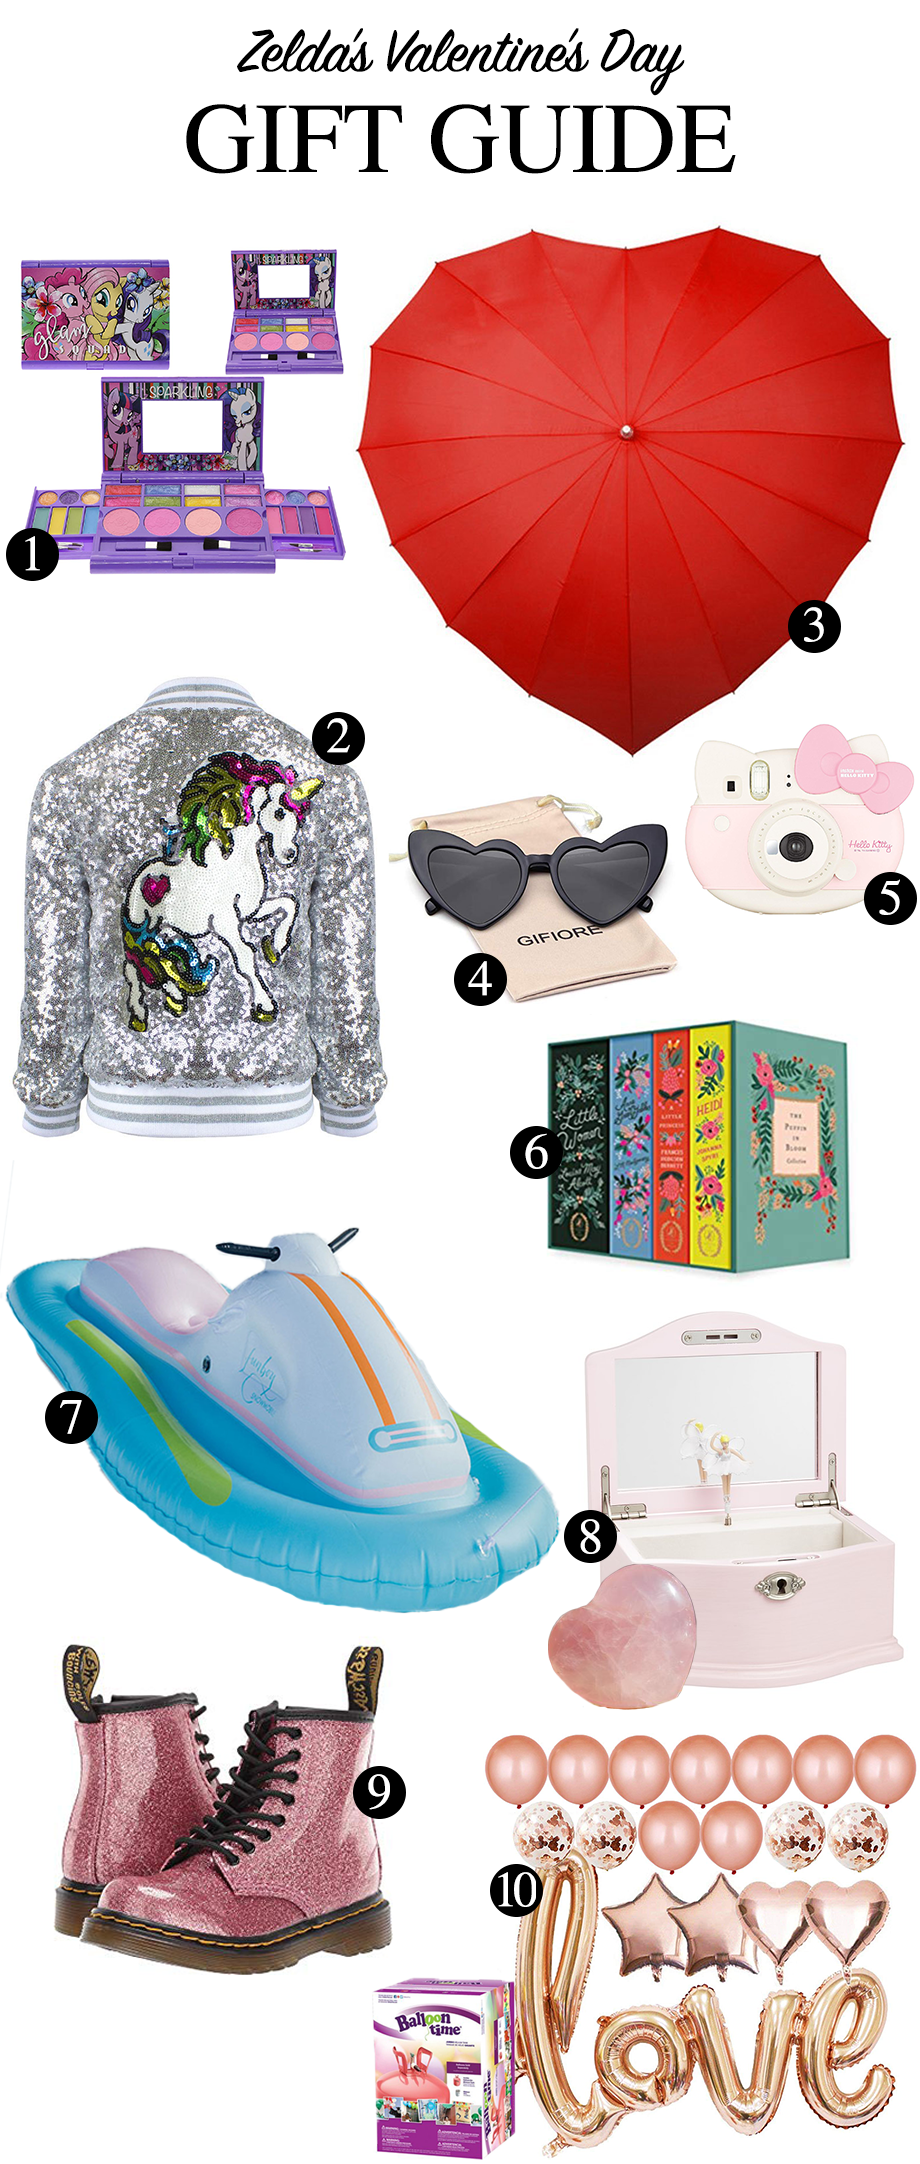 Zelda's Valentine's Day Gift Guide on Glitter and Bubbles.